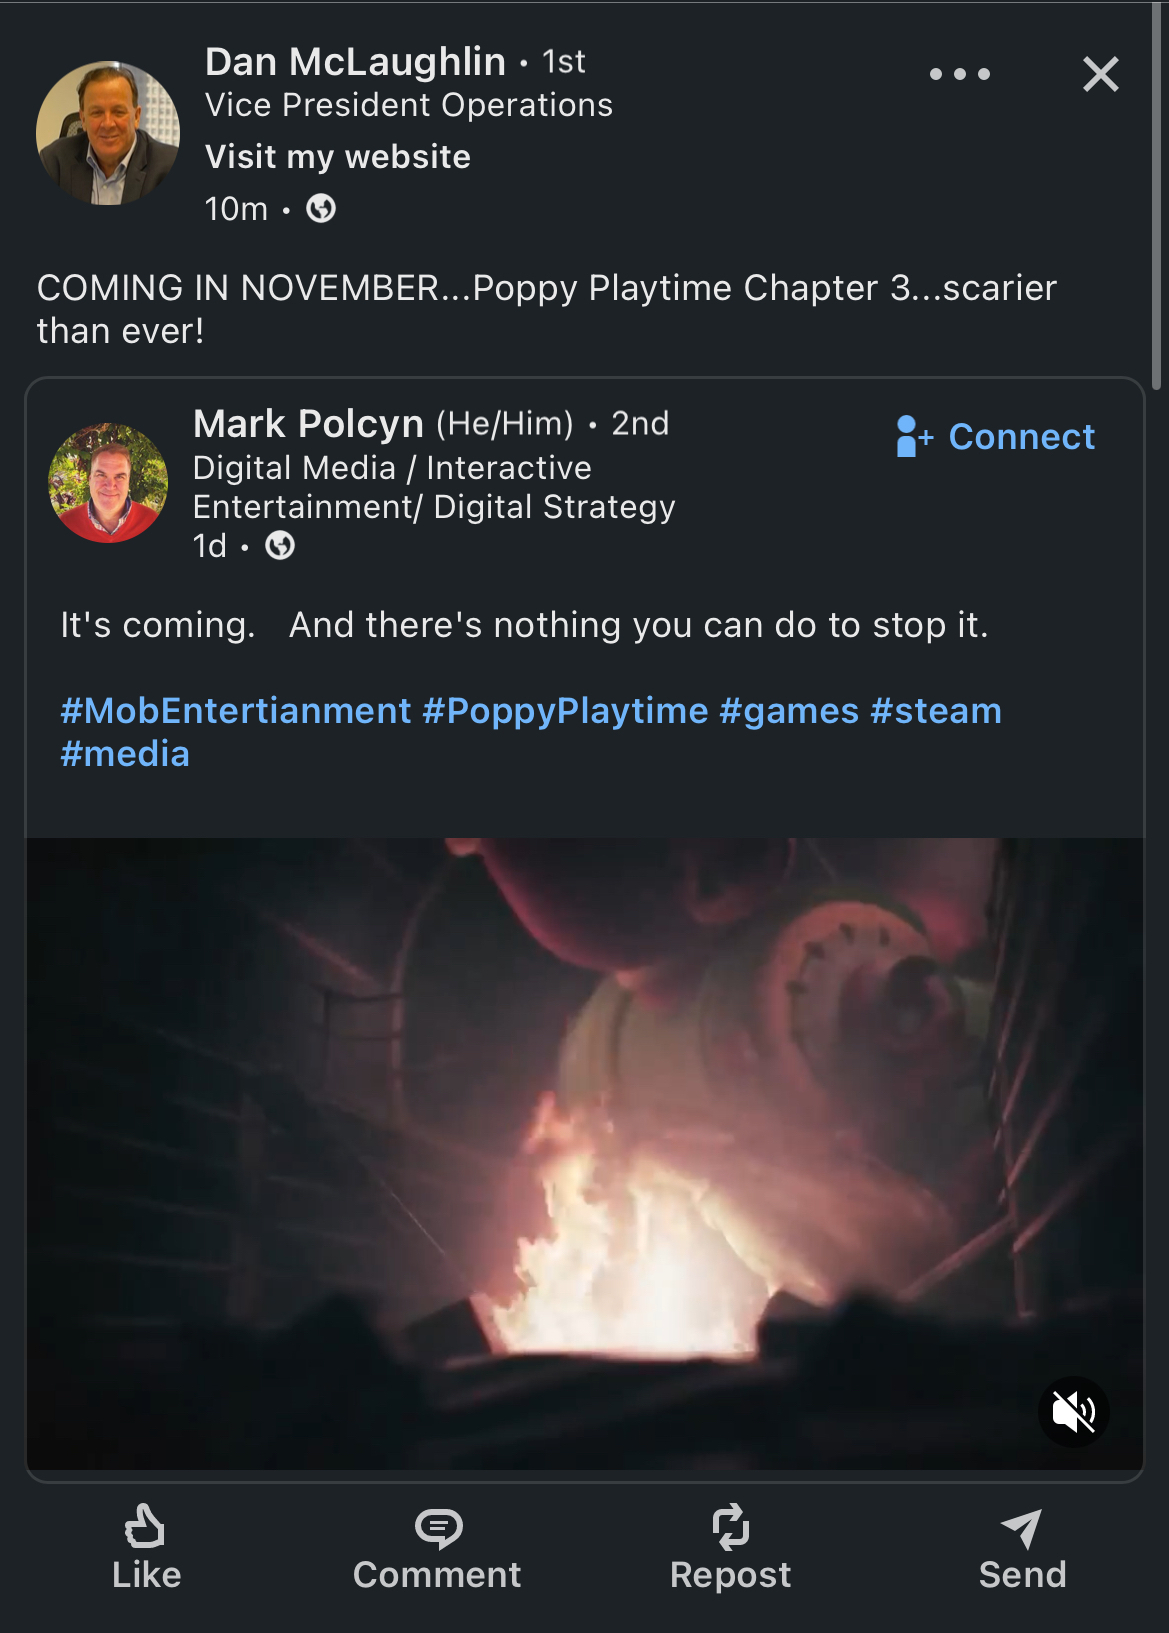 When is Poppy Playtime Chapter 3 expected to release?